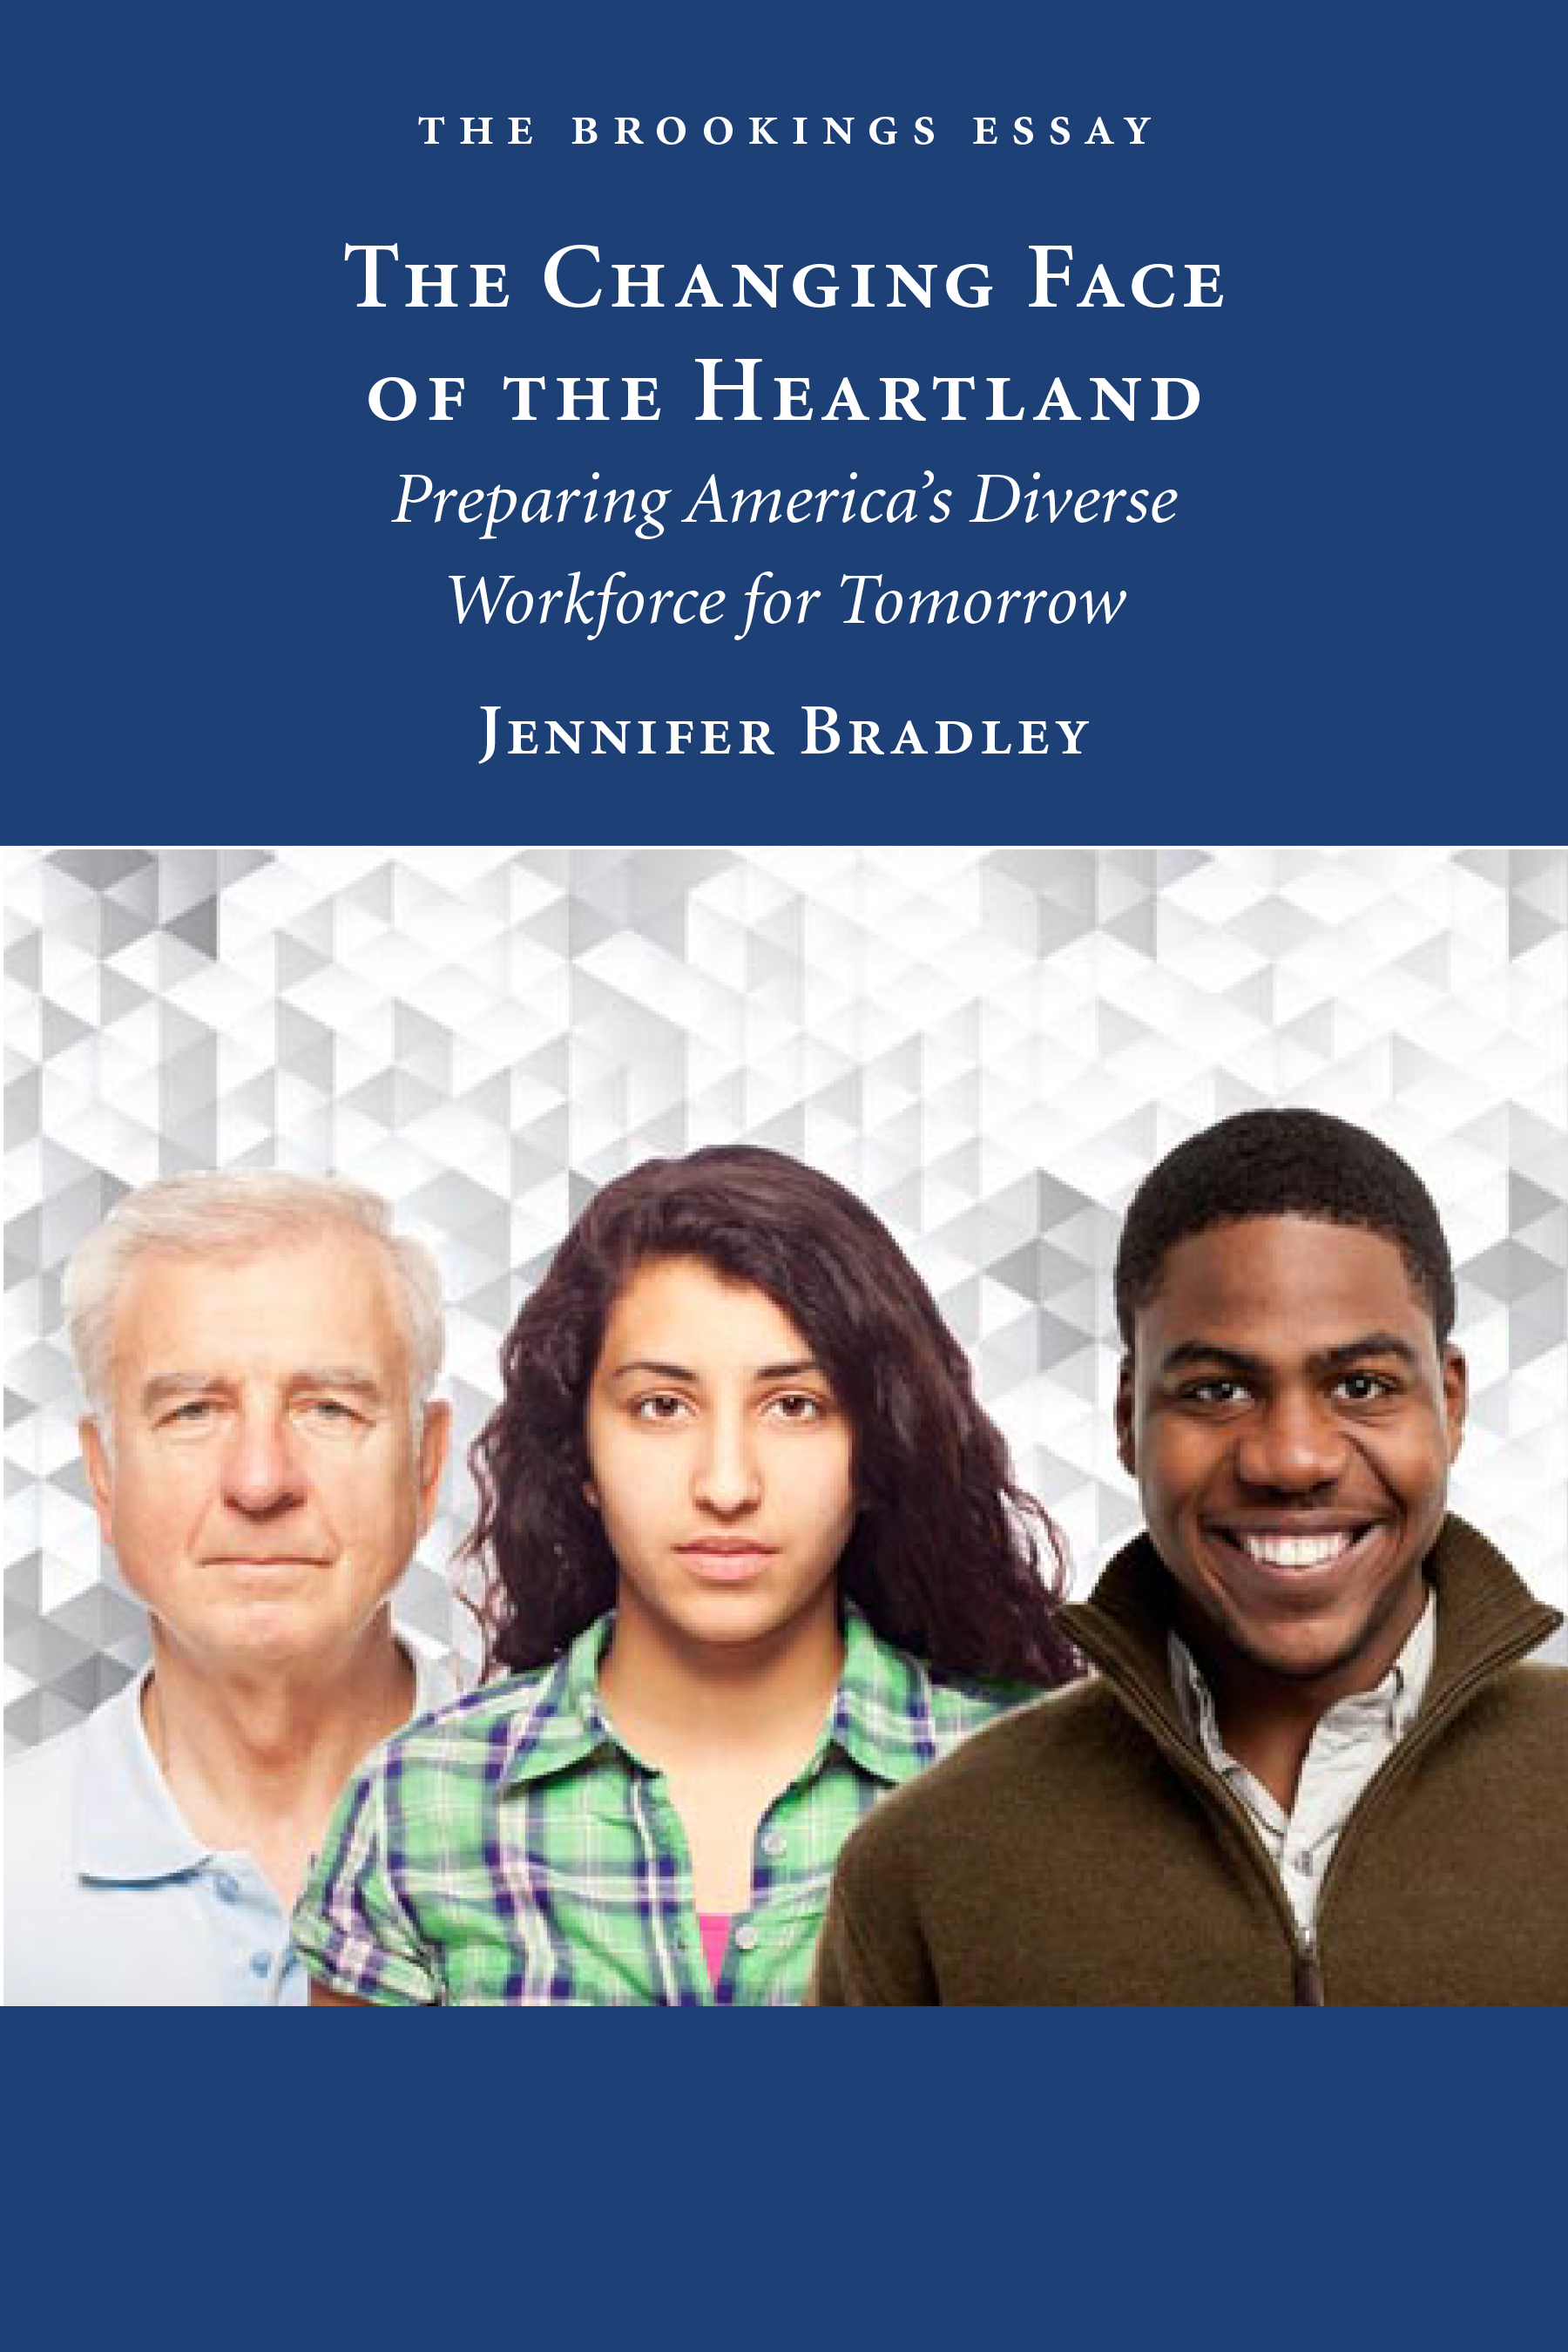 The Changing Face of the Heartland: Preparing America's Diverse Workforce for Tomorrow